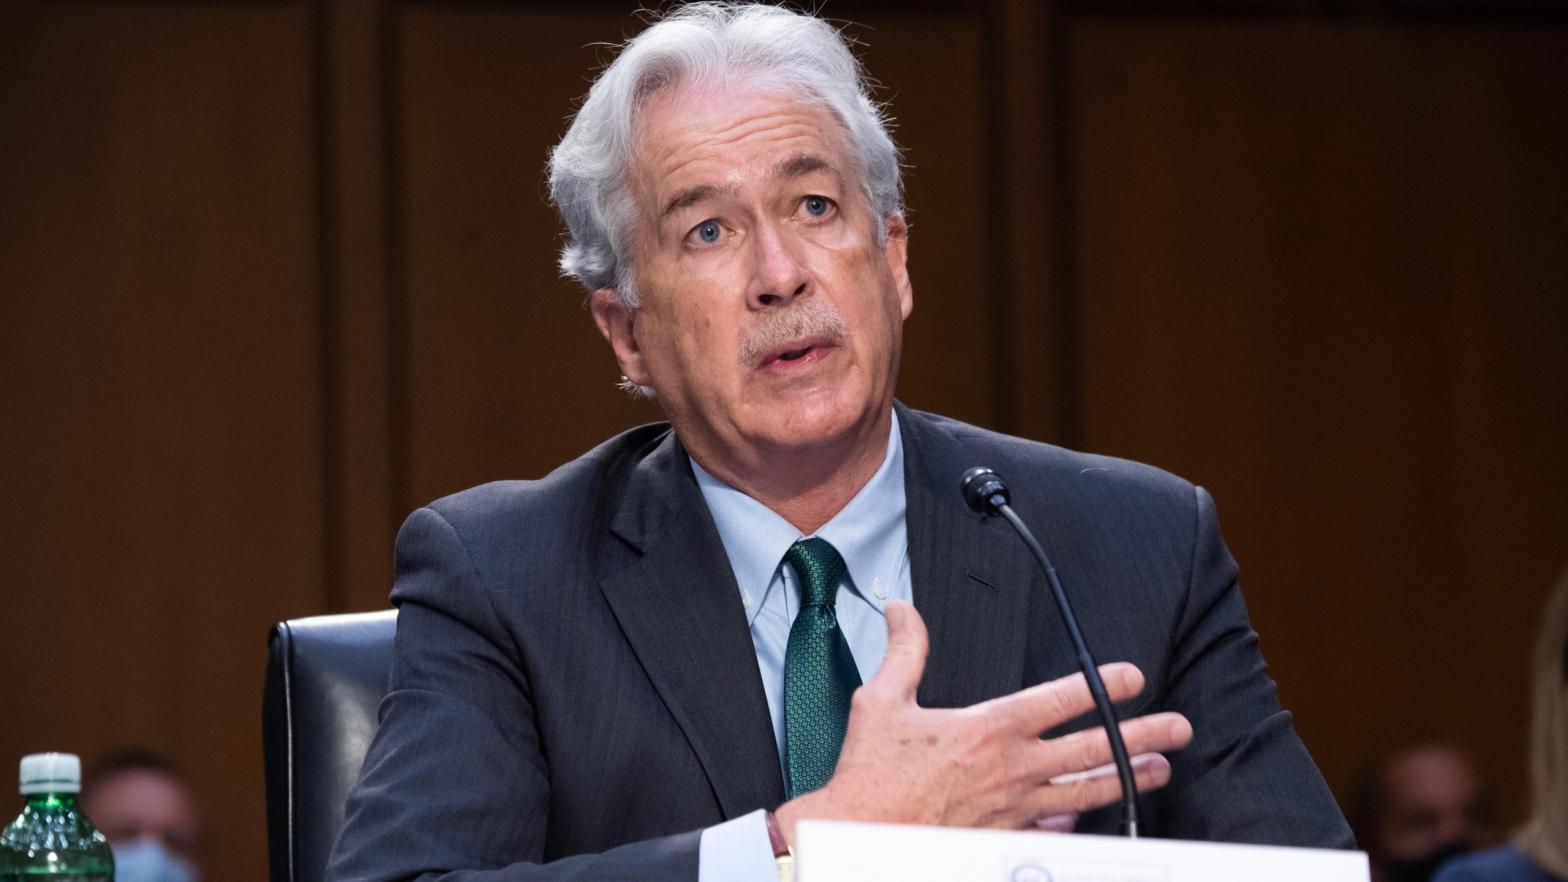 CIA Director William Burns testifying before the Senate Intelligence Committee on April 14, 2021 at the Capitol in Washington, DC. (Photo: Saul Loeb / Pool, Getty Images)